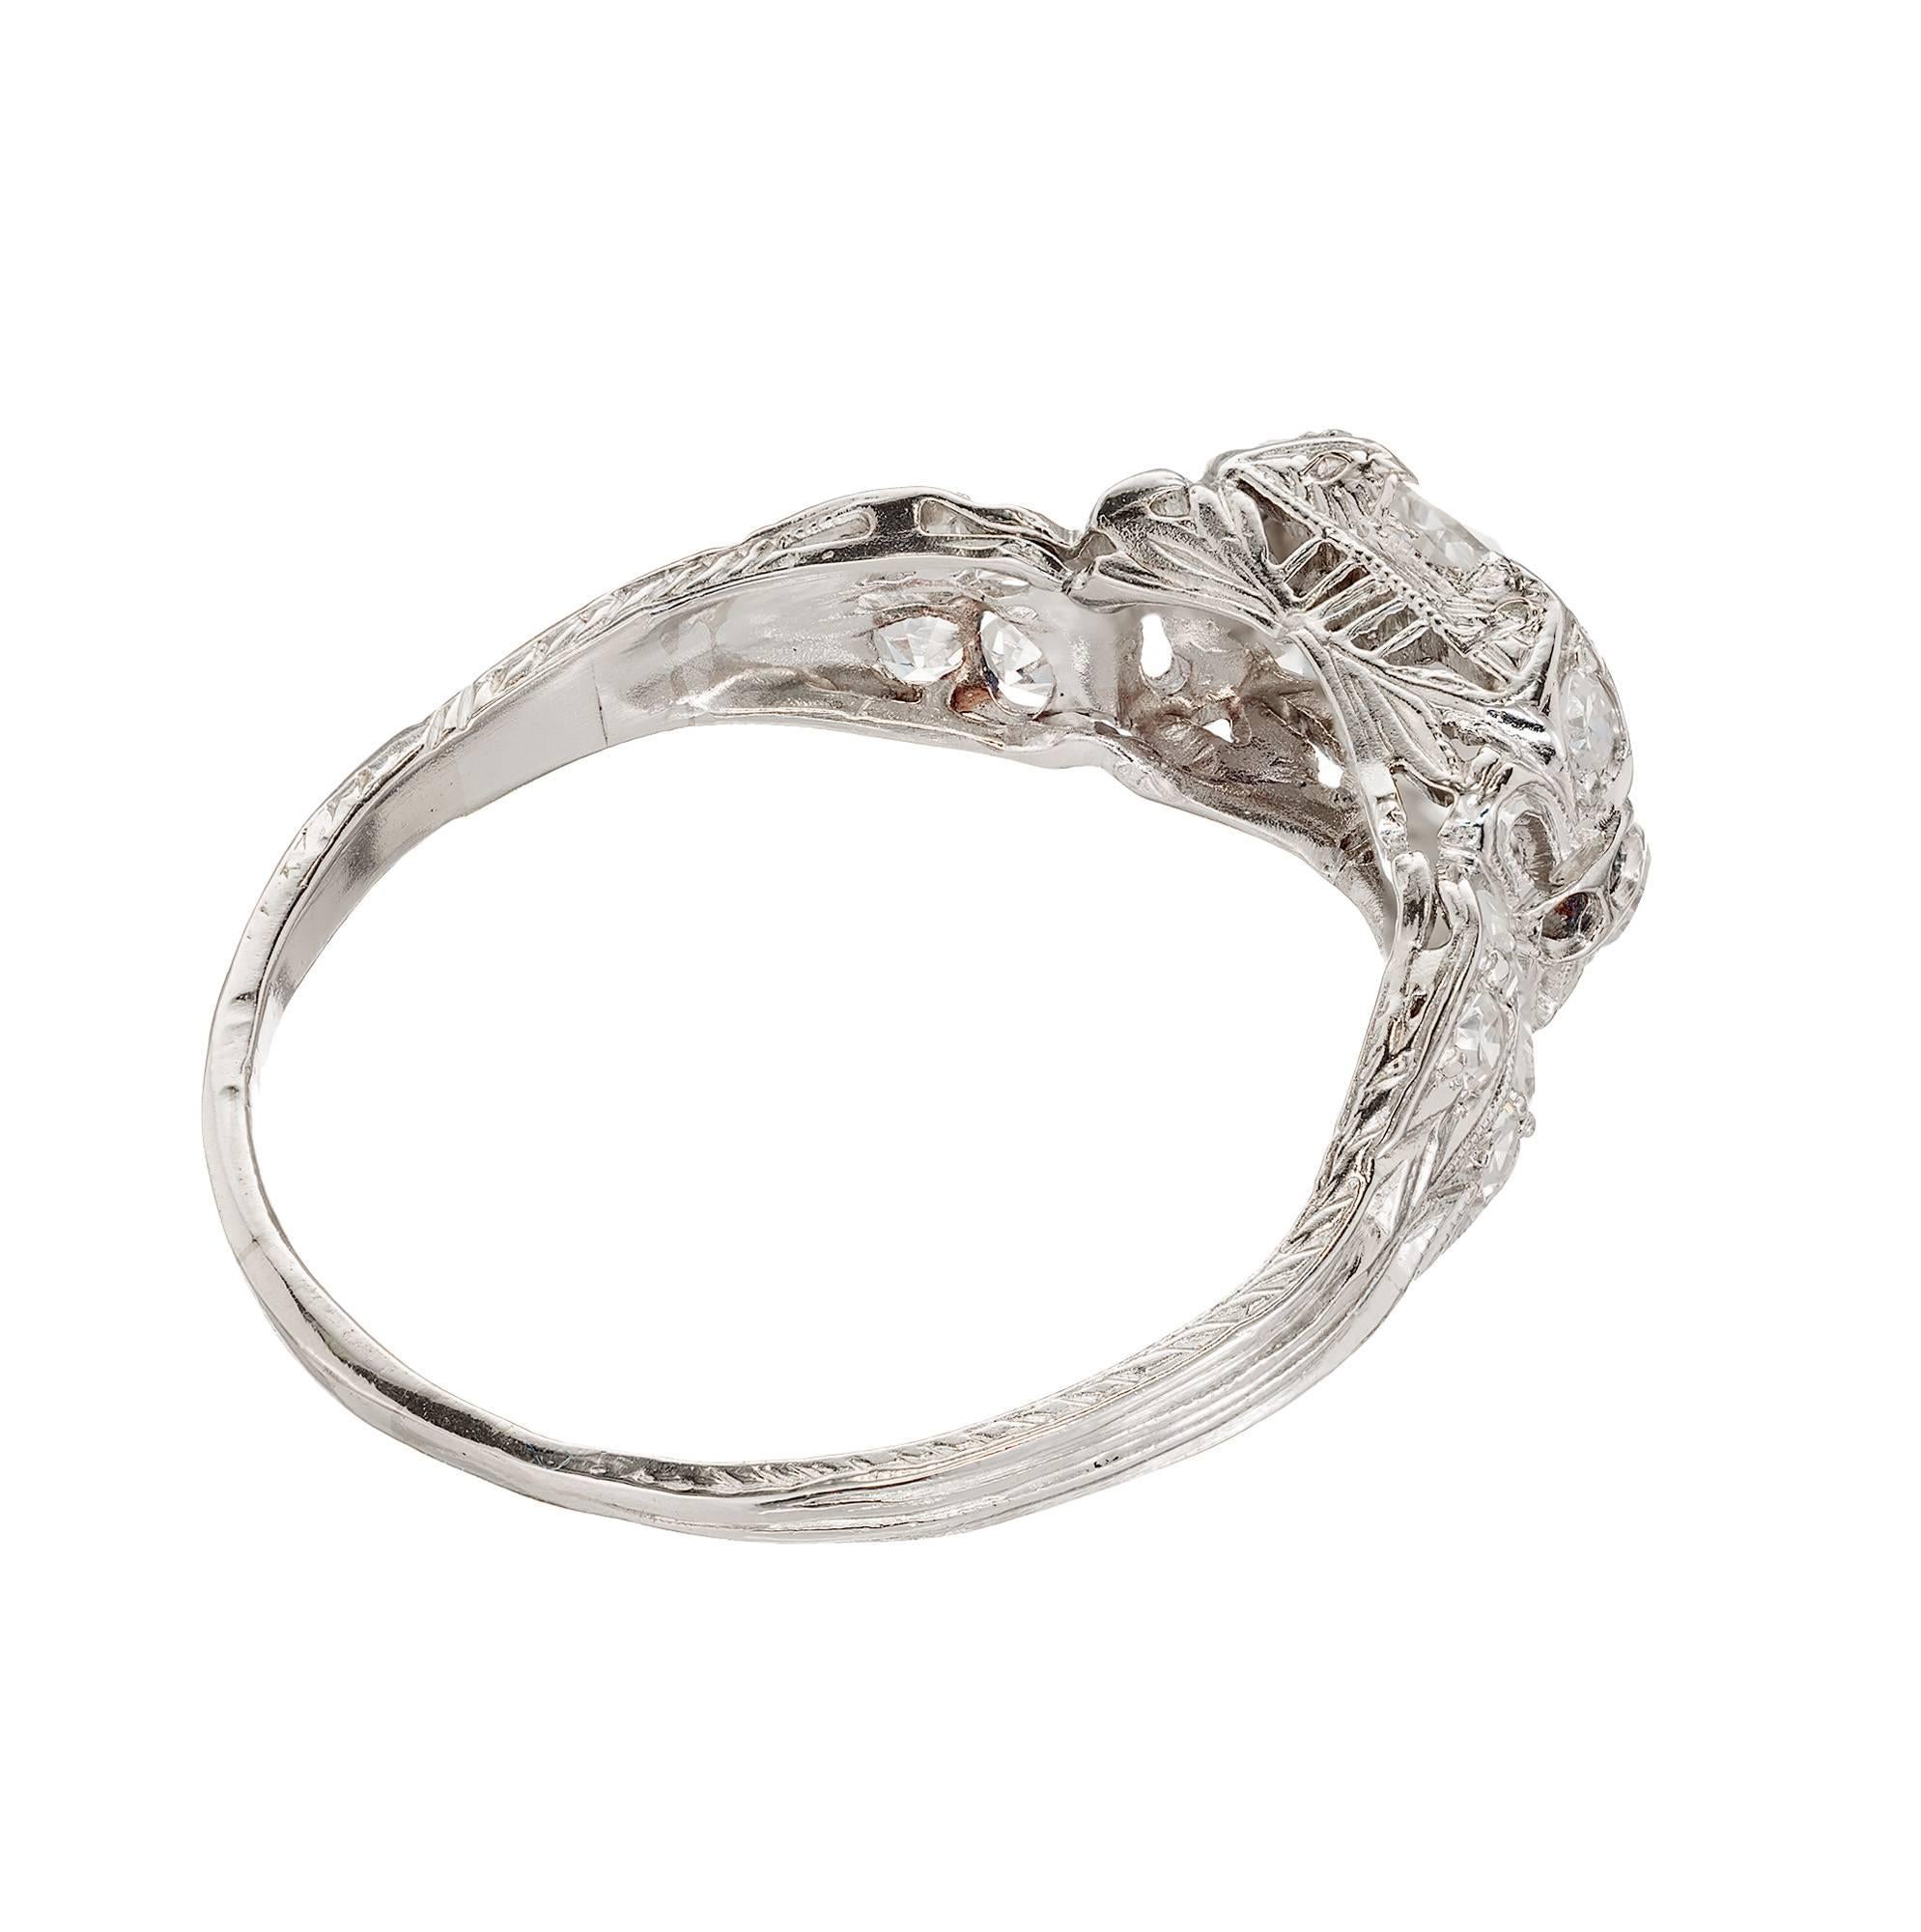 1.17 Carat Old European Cut Diamond Edwardian Platinum Engagement Ring In Good Condition For Sale In Stamford, CT